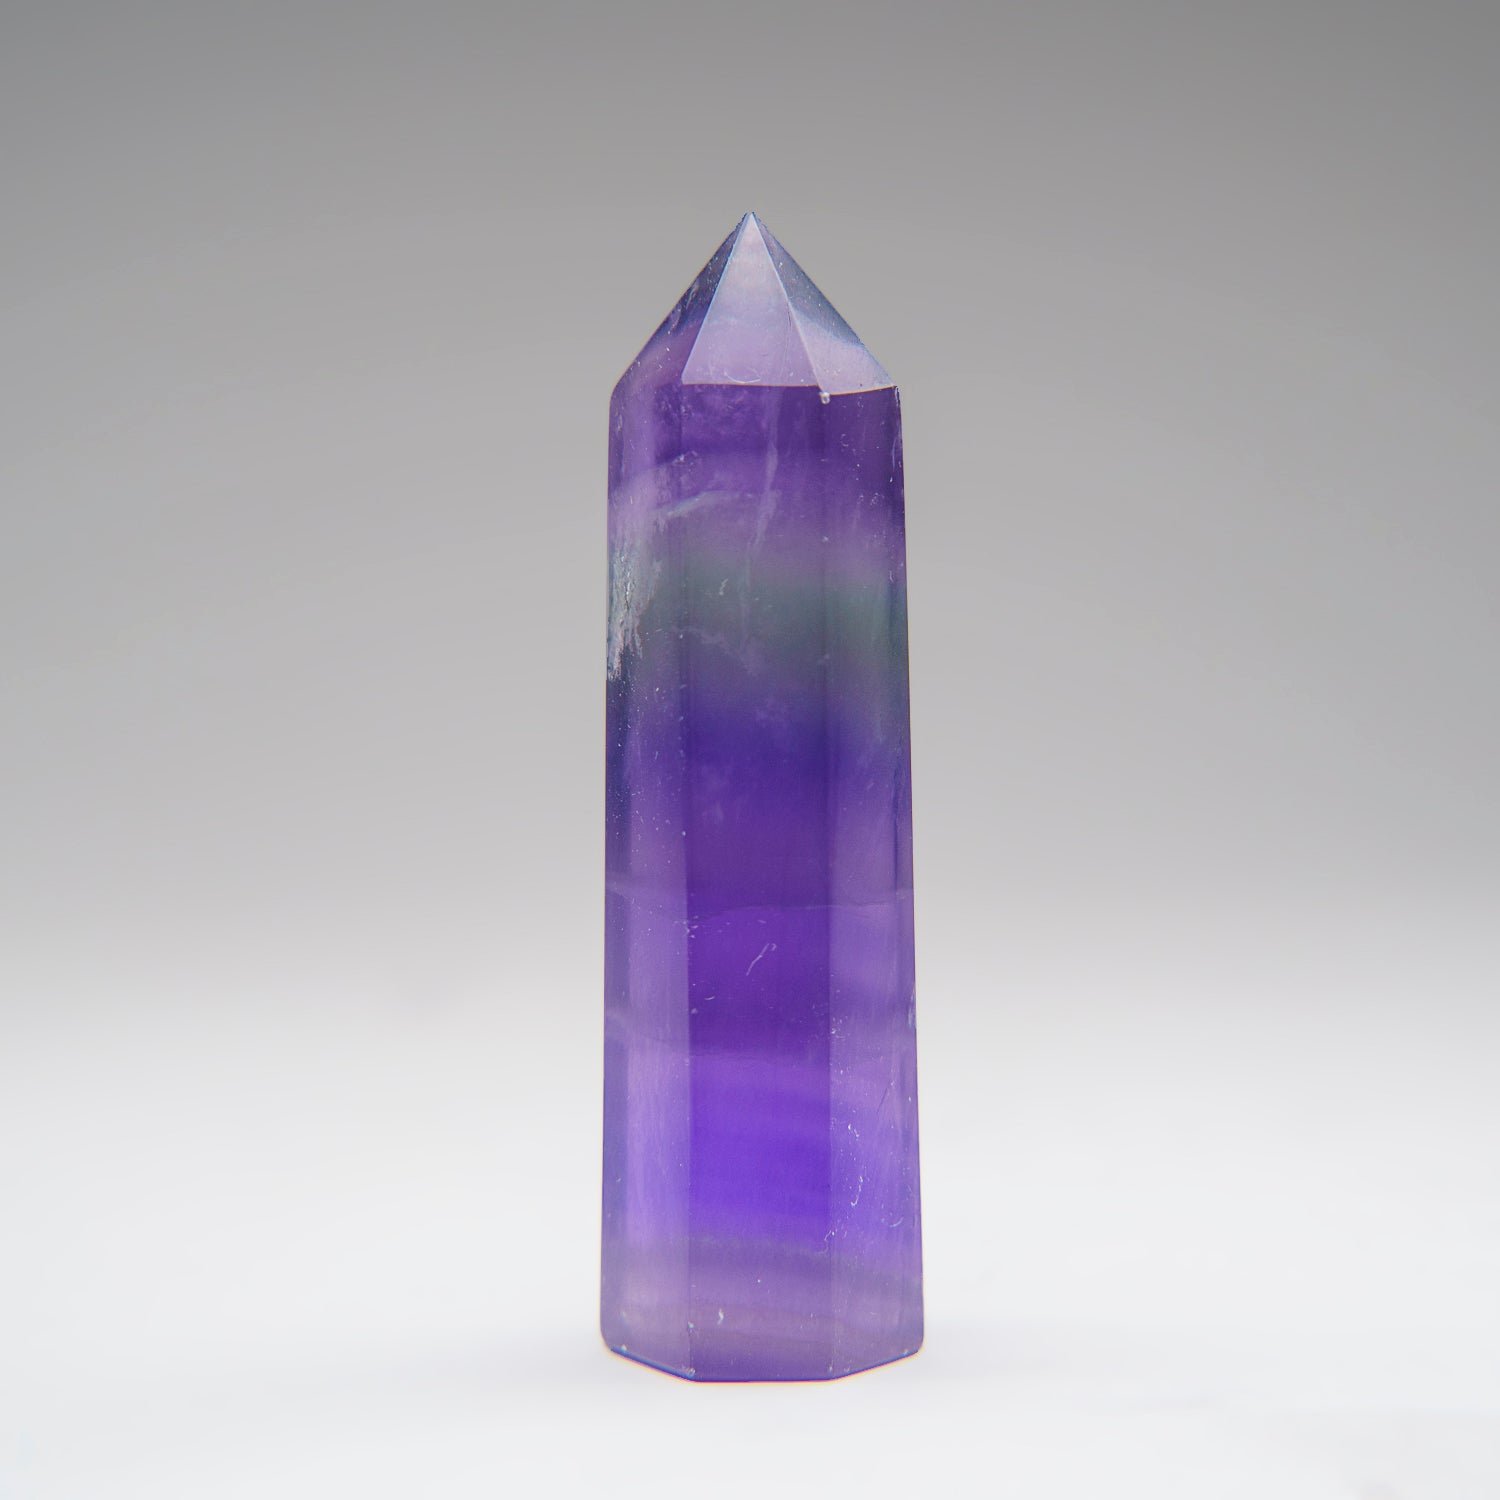 Genuine Polished Purple Fluorite Point from China (98 grams)